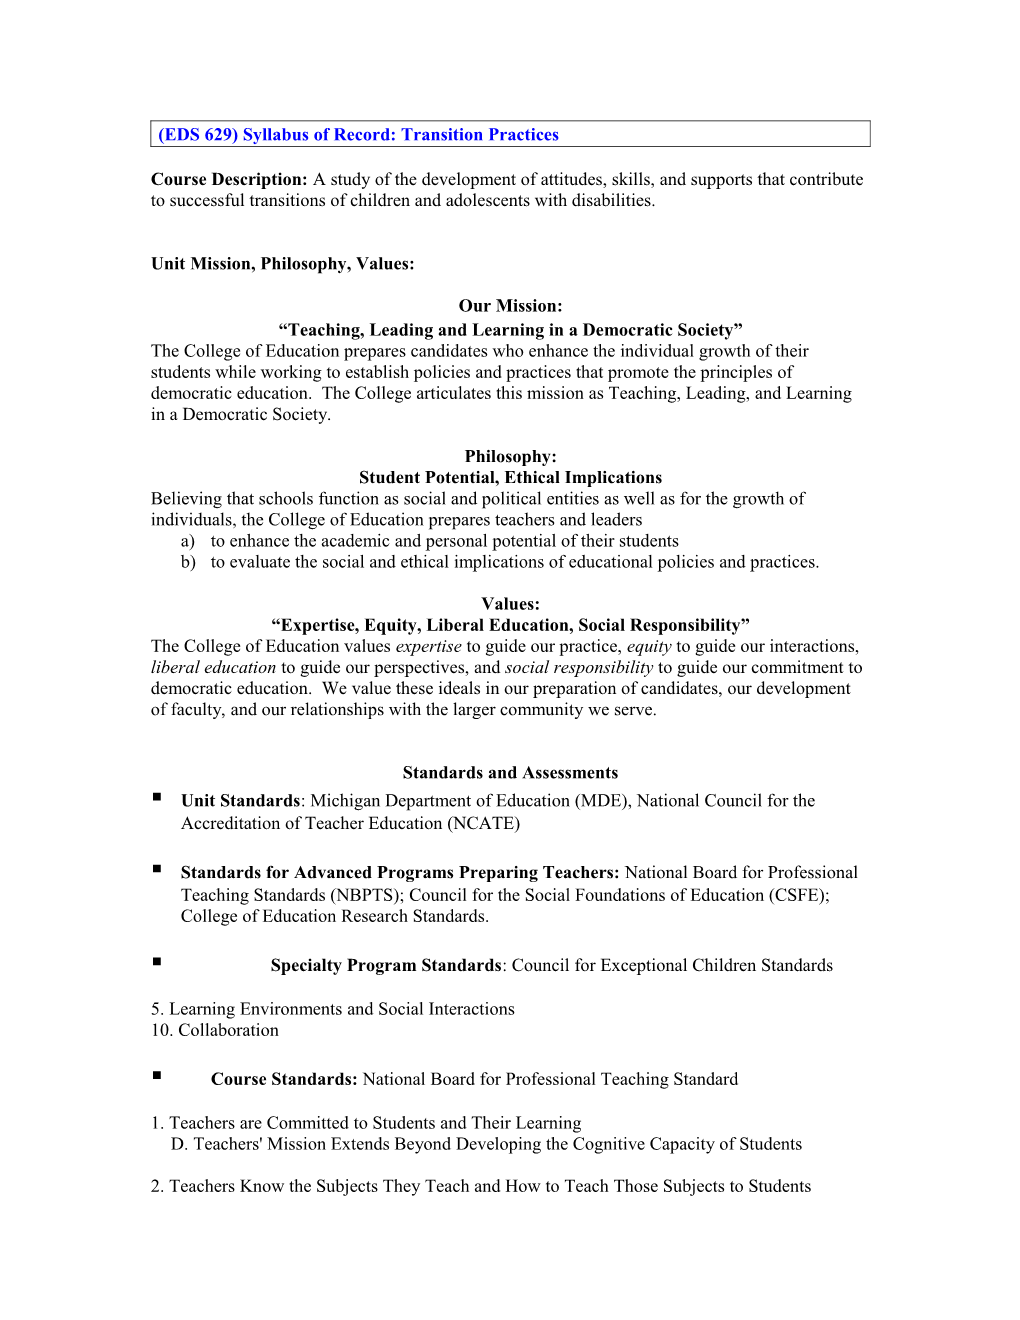 (EDS 629) Syllabus of Record: Transition Practices